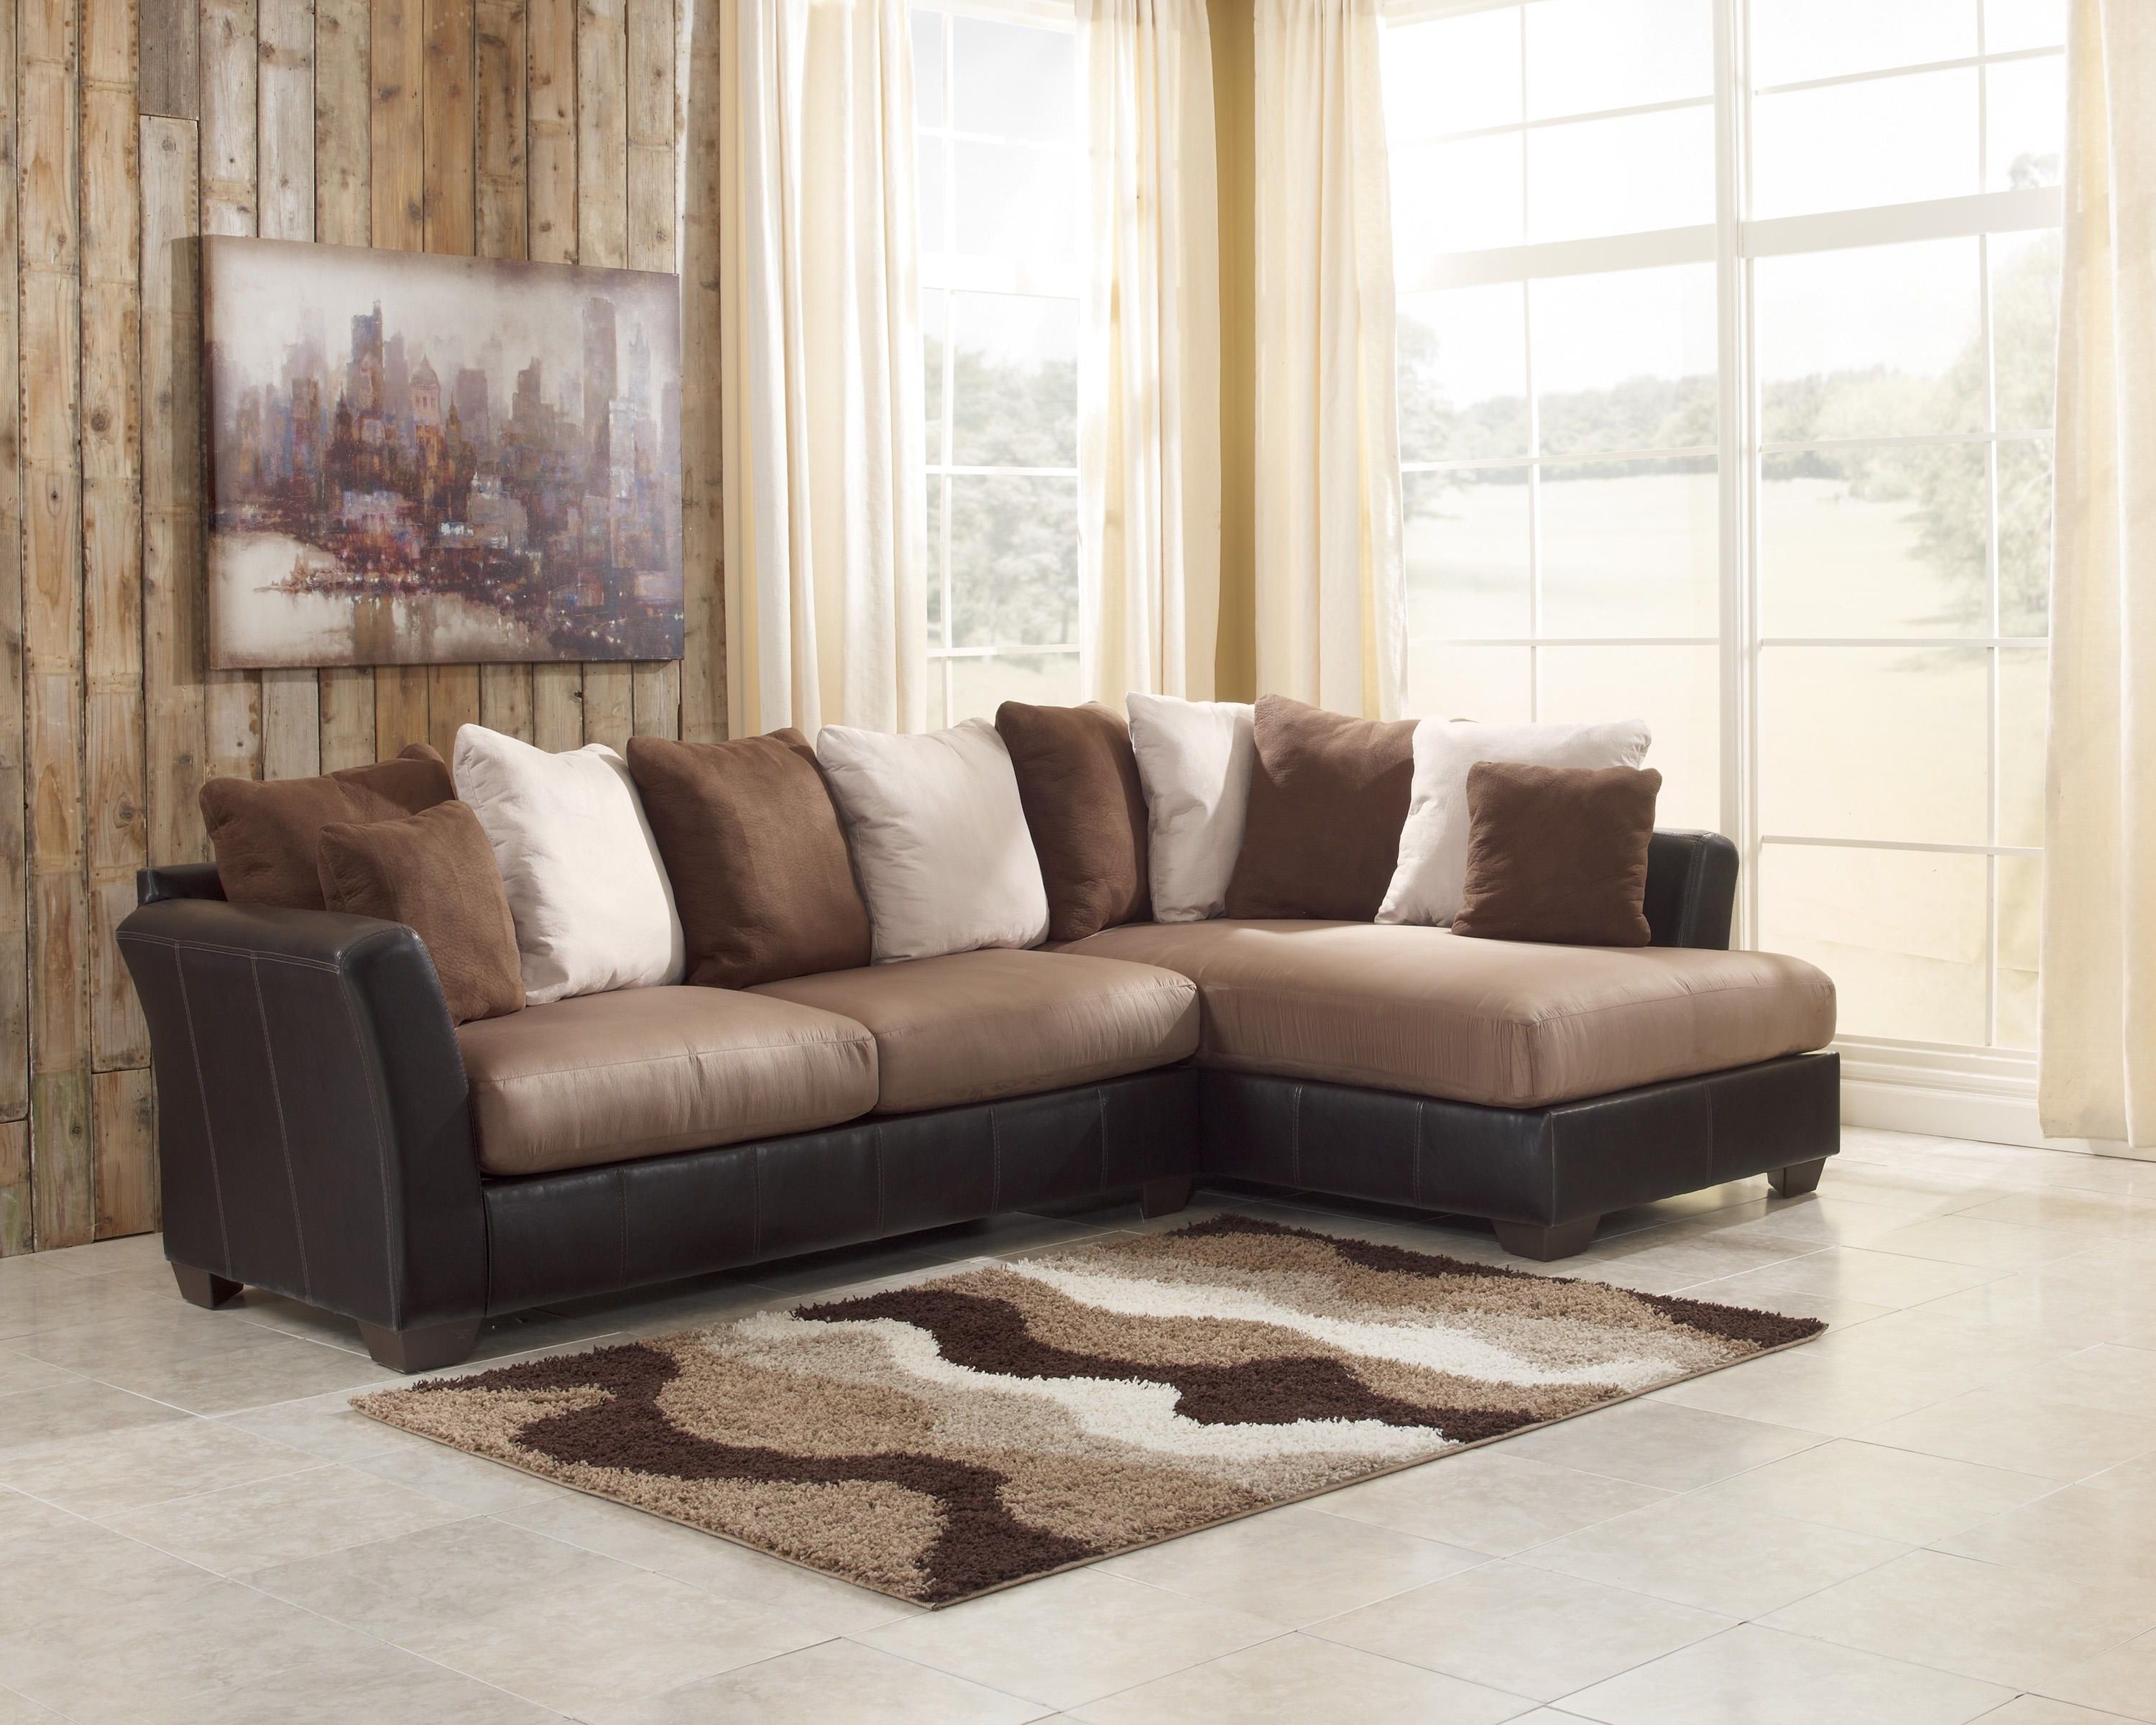 Individual Piece Sectional Sofas With Most Recent Gallery Individual Sectional Sofa Pieces – Mediasupload (View 1 of 20)